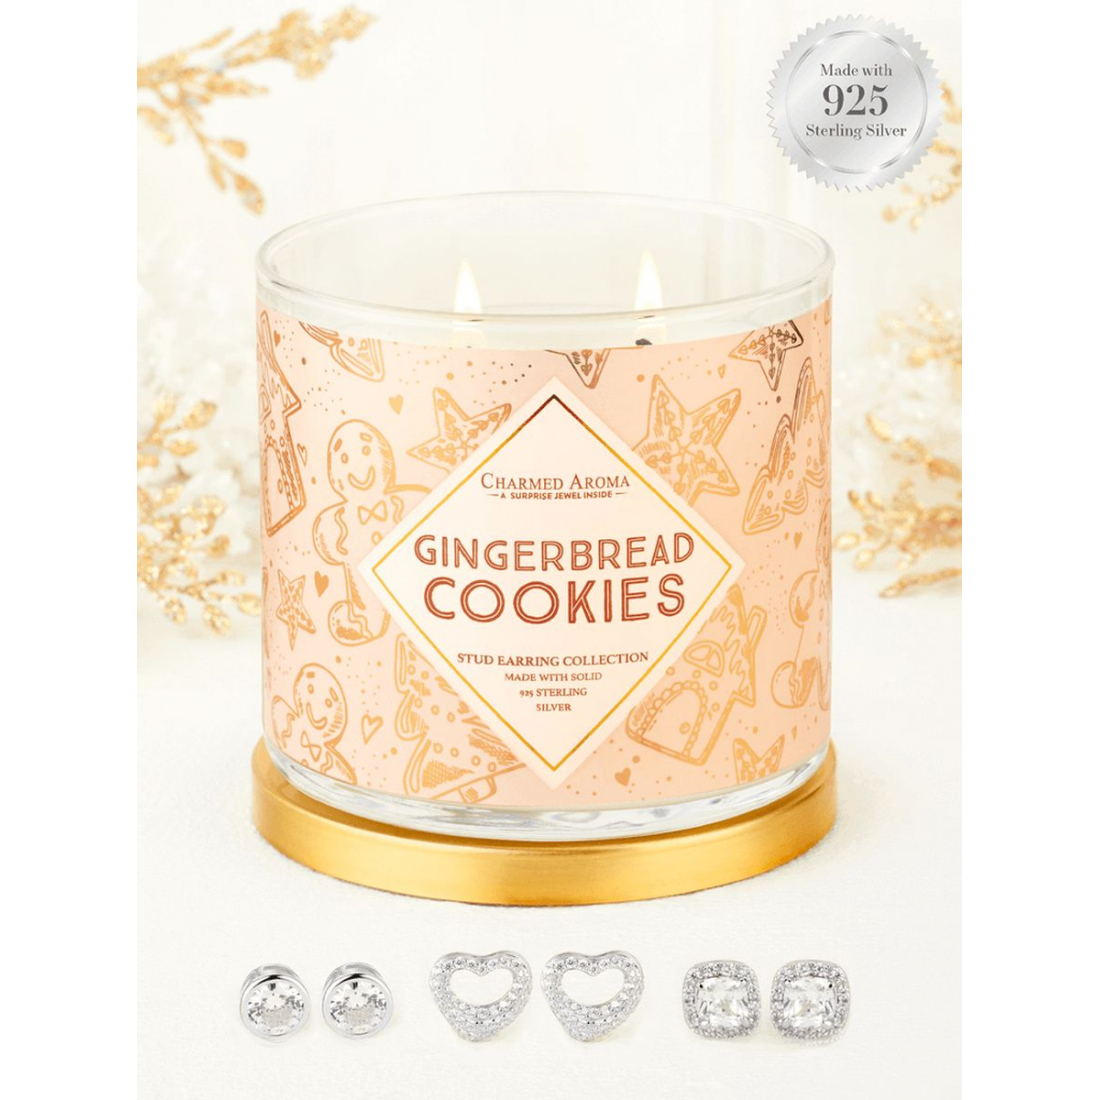 Women's 'Gingerbread Cookies' Candle Set - 500 g